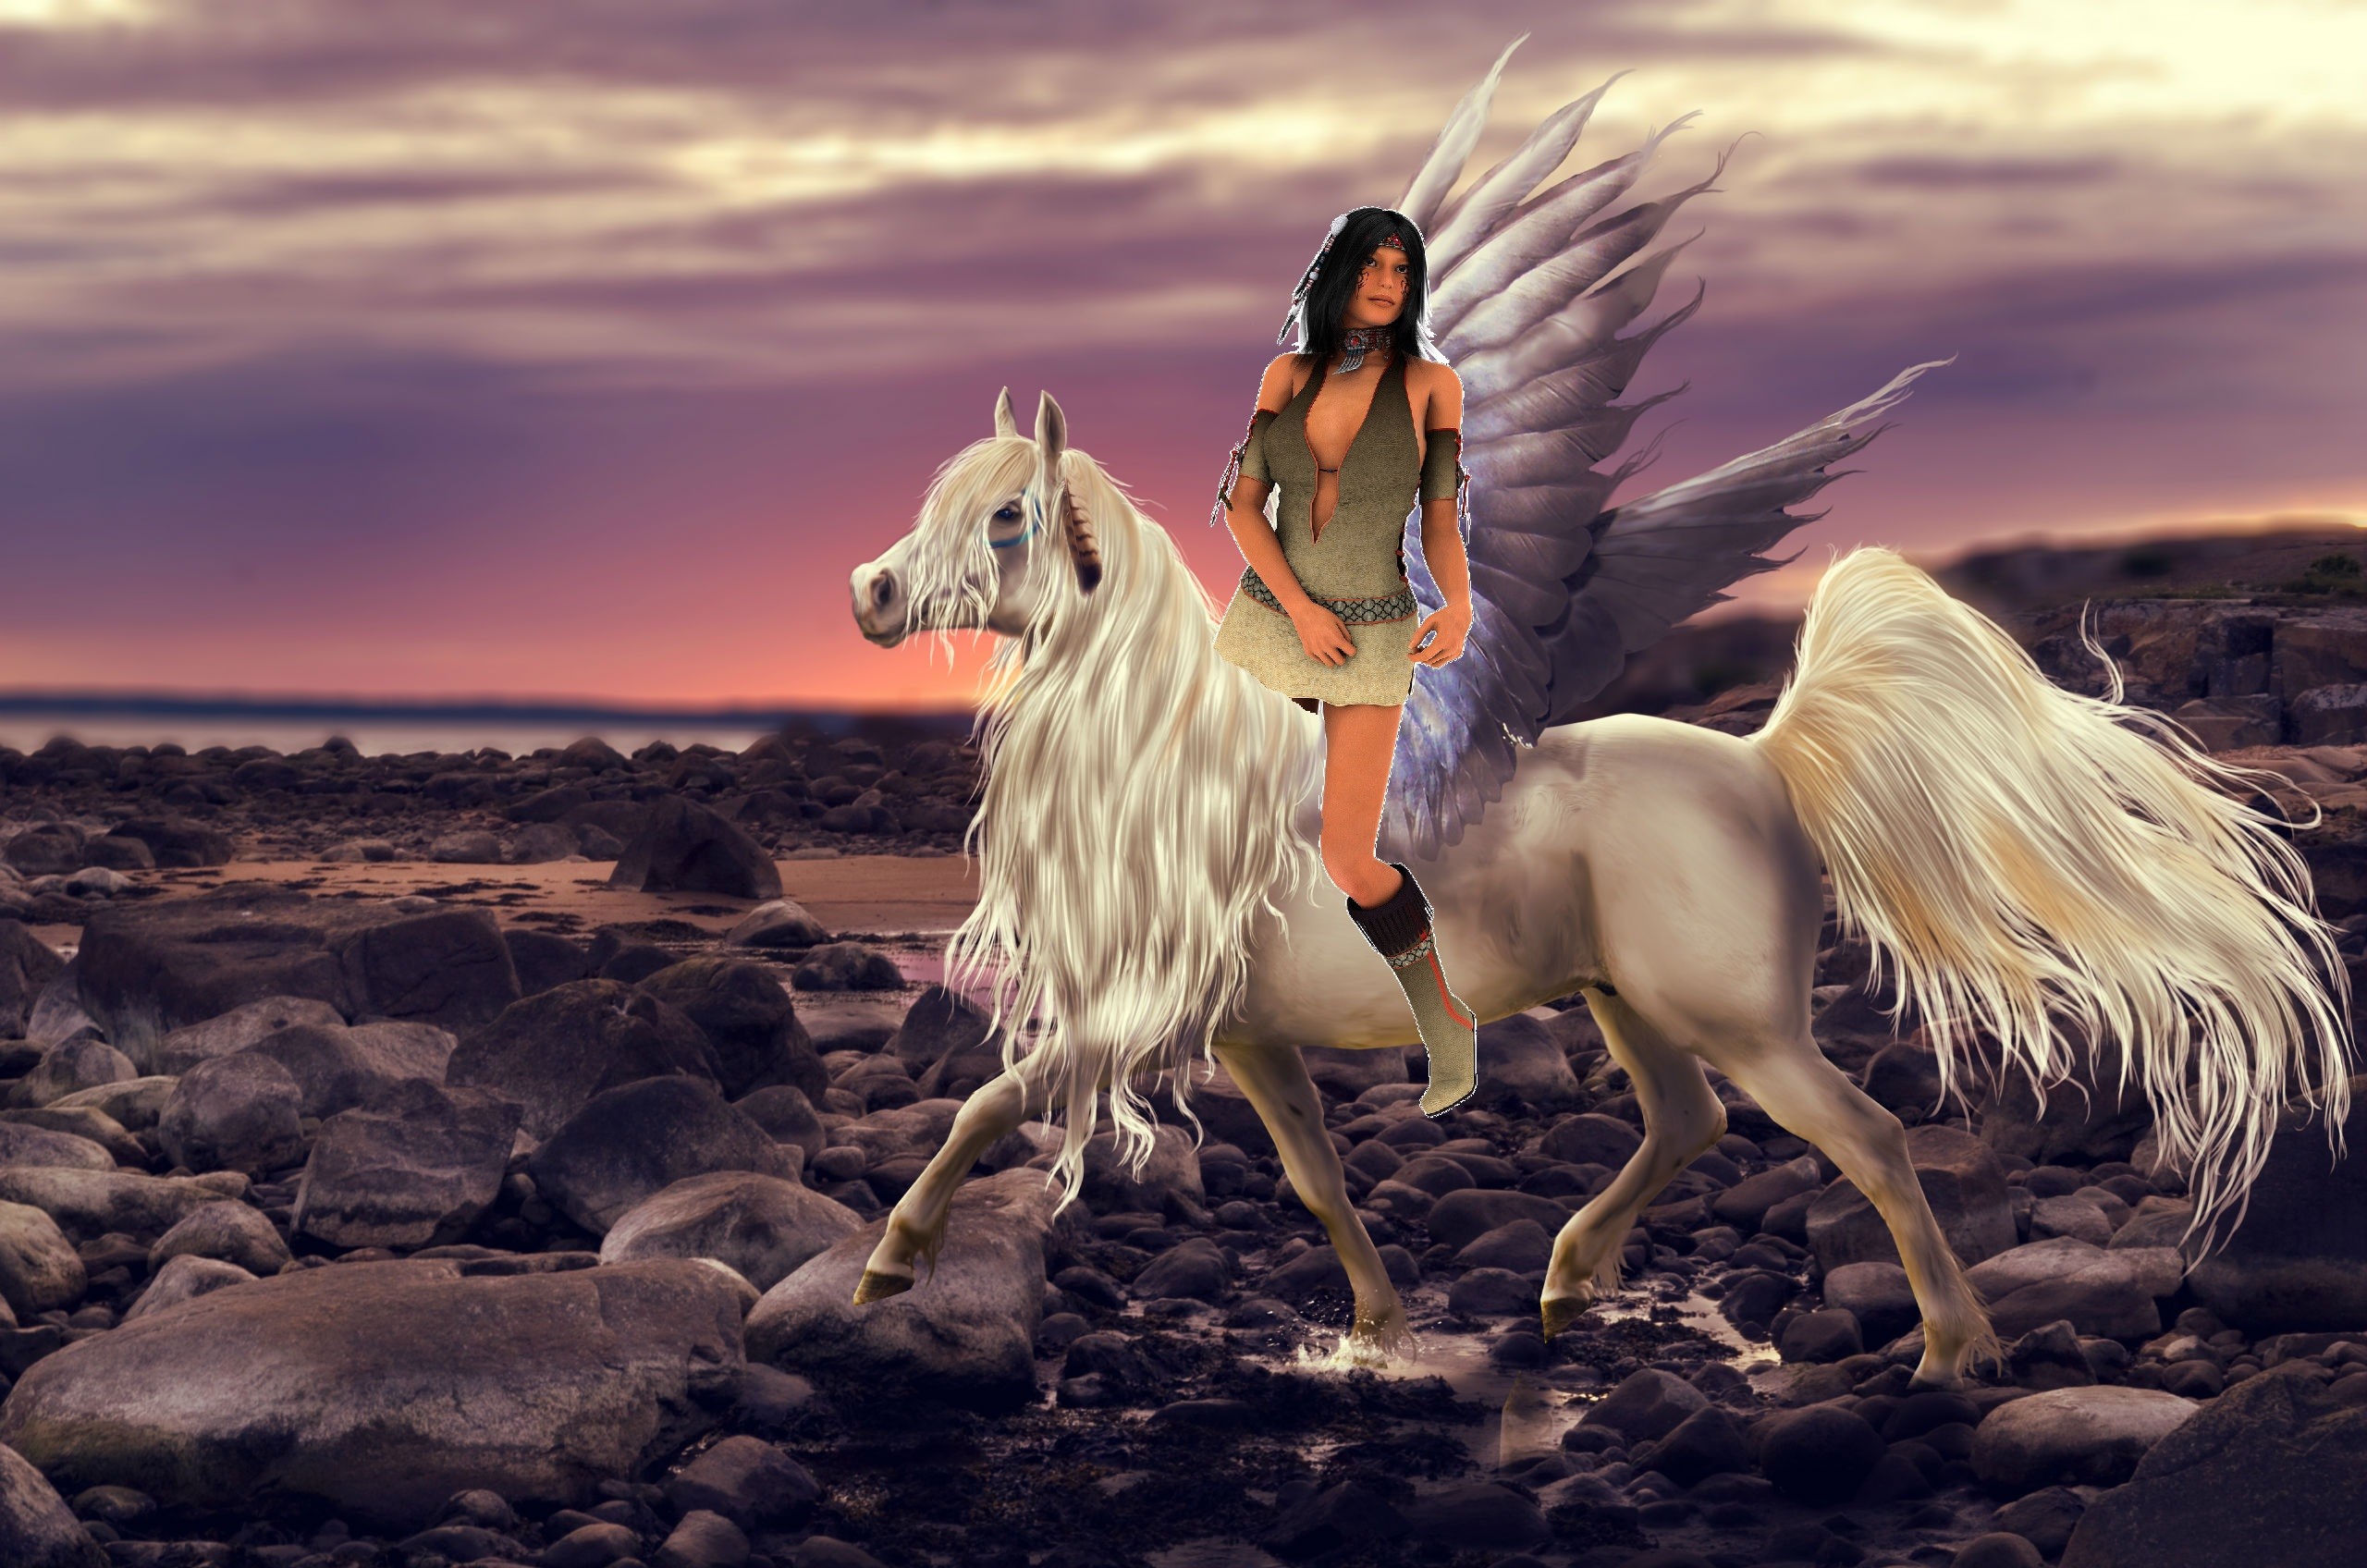 Native Americans Images An Native American Girl Riding - Pferde Mit Flügel - HD Wallpaper 